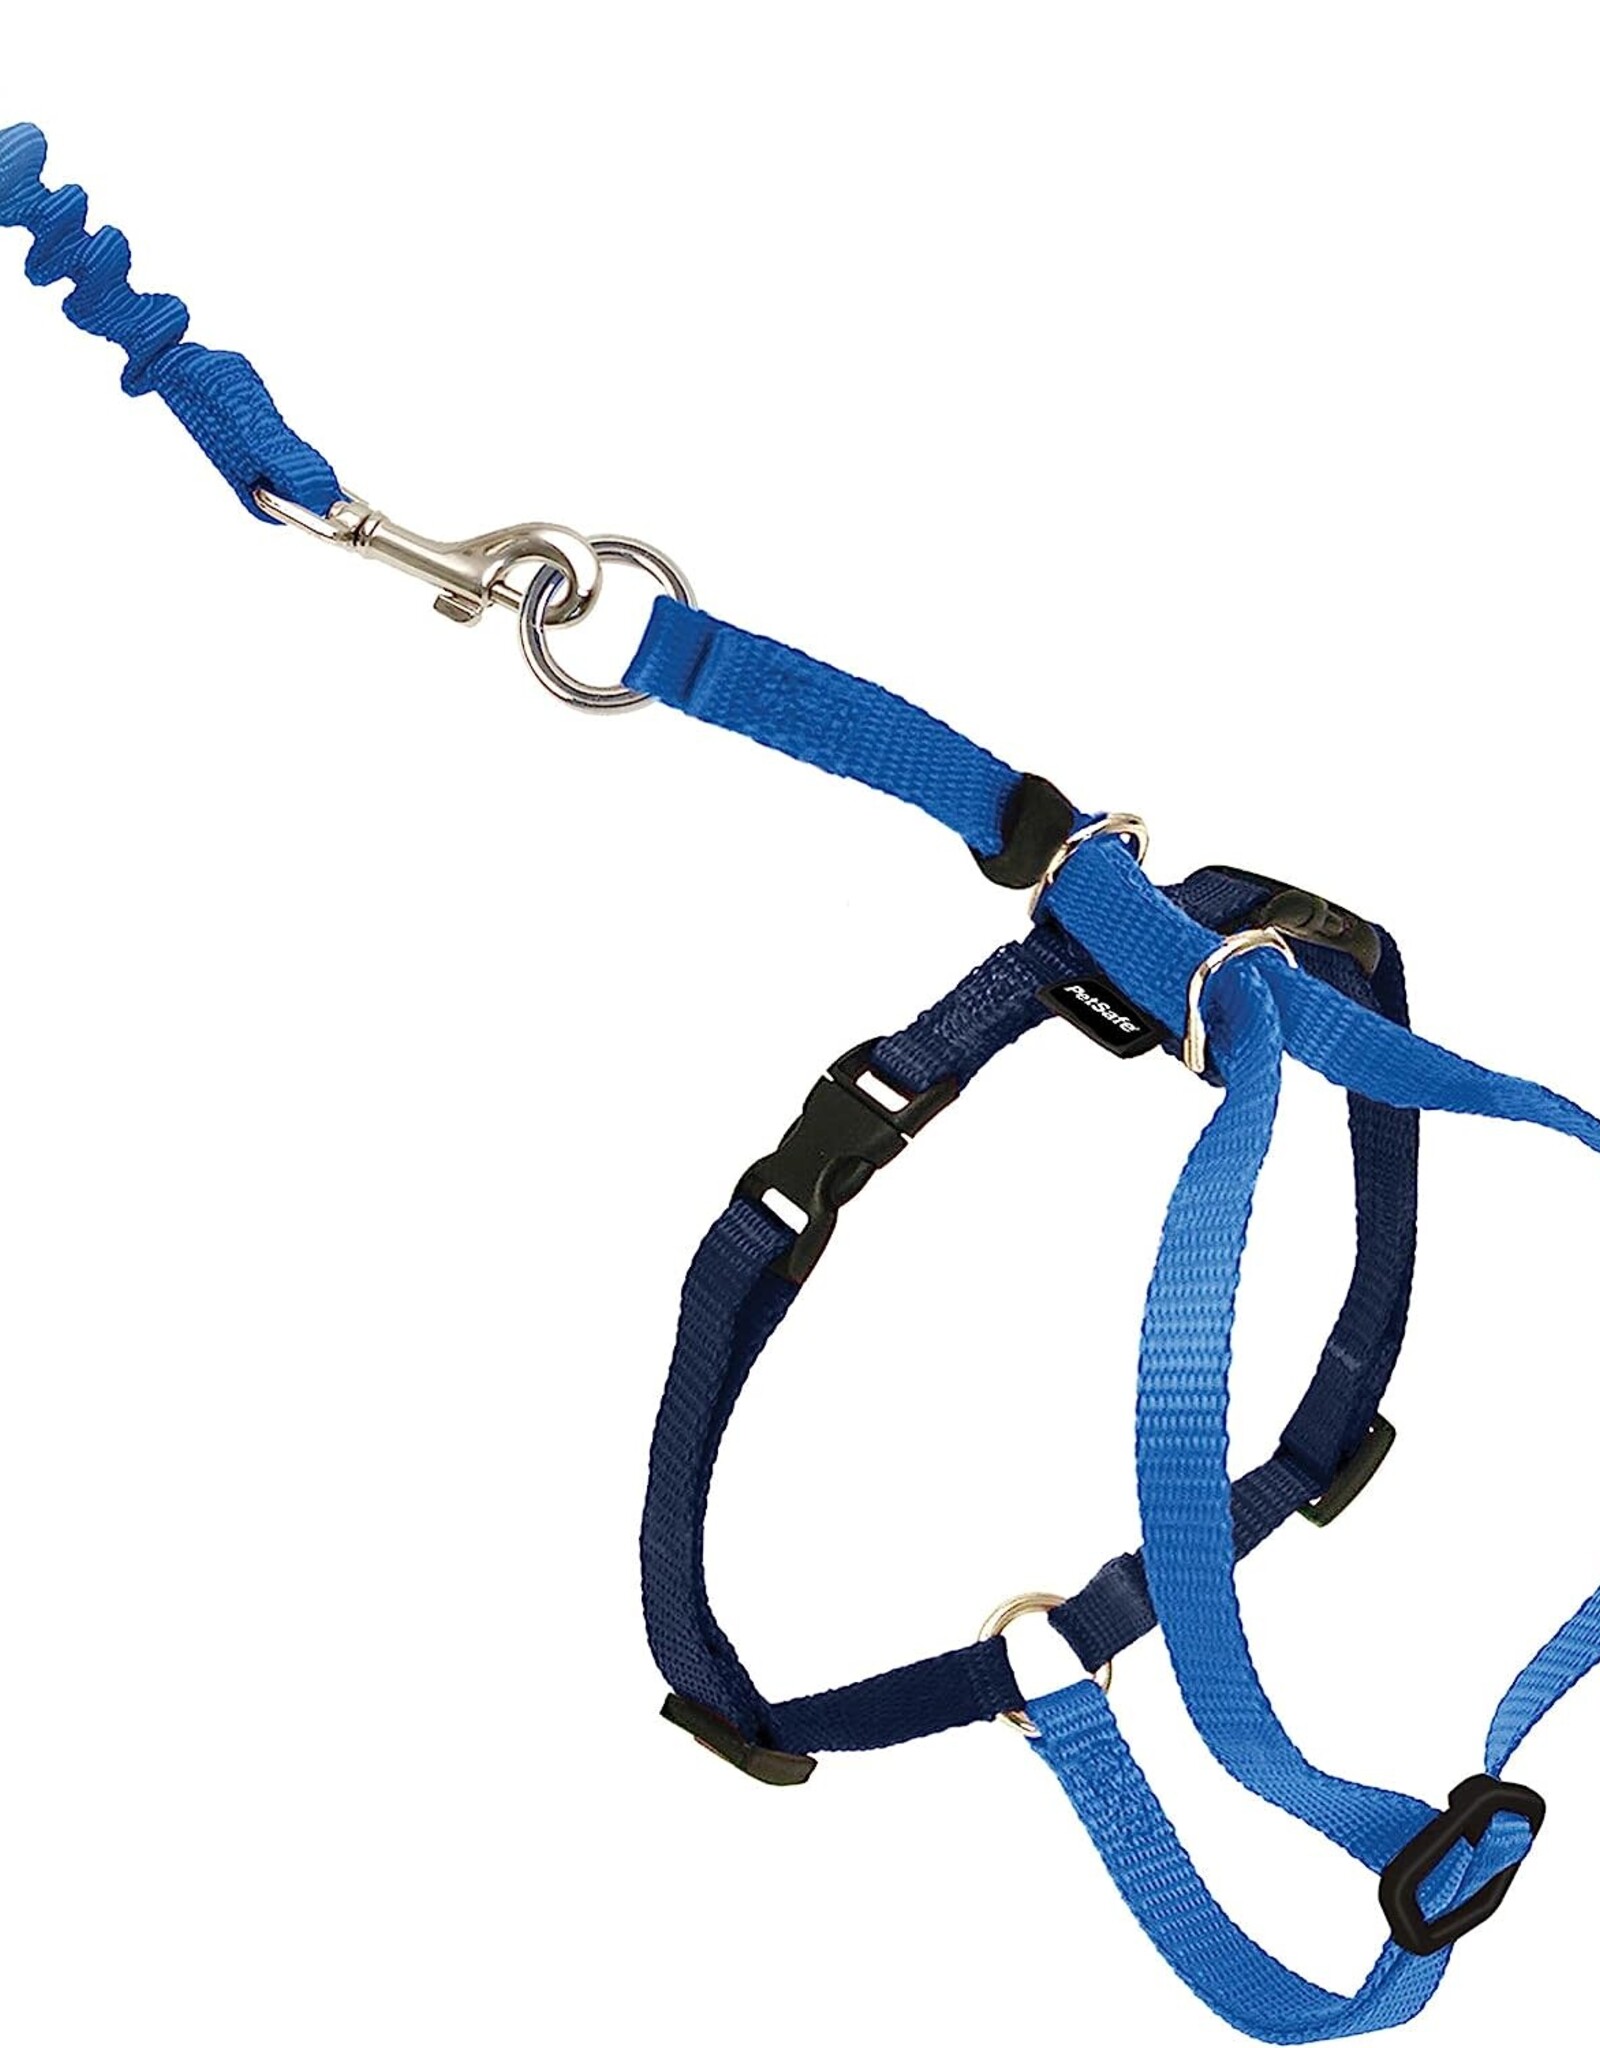 RADIO SYSTEMS CORP(PET SAFE) Come With Me Kitty Harness & Bungee Leash Medium Royal Blue